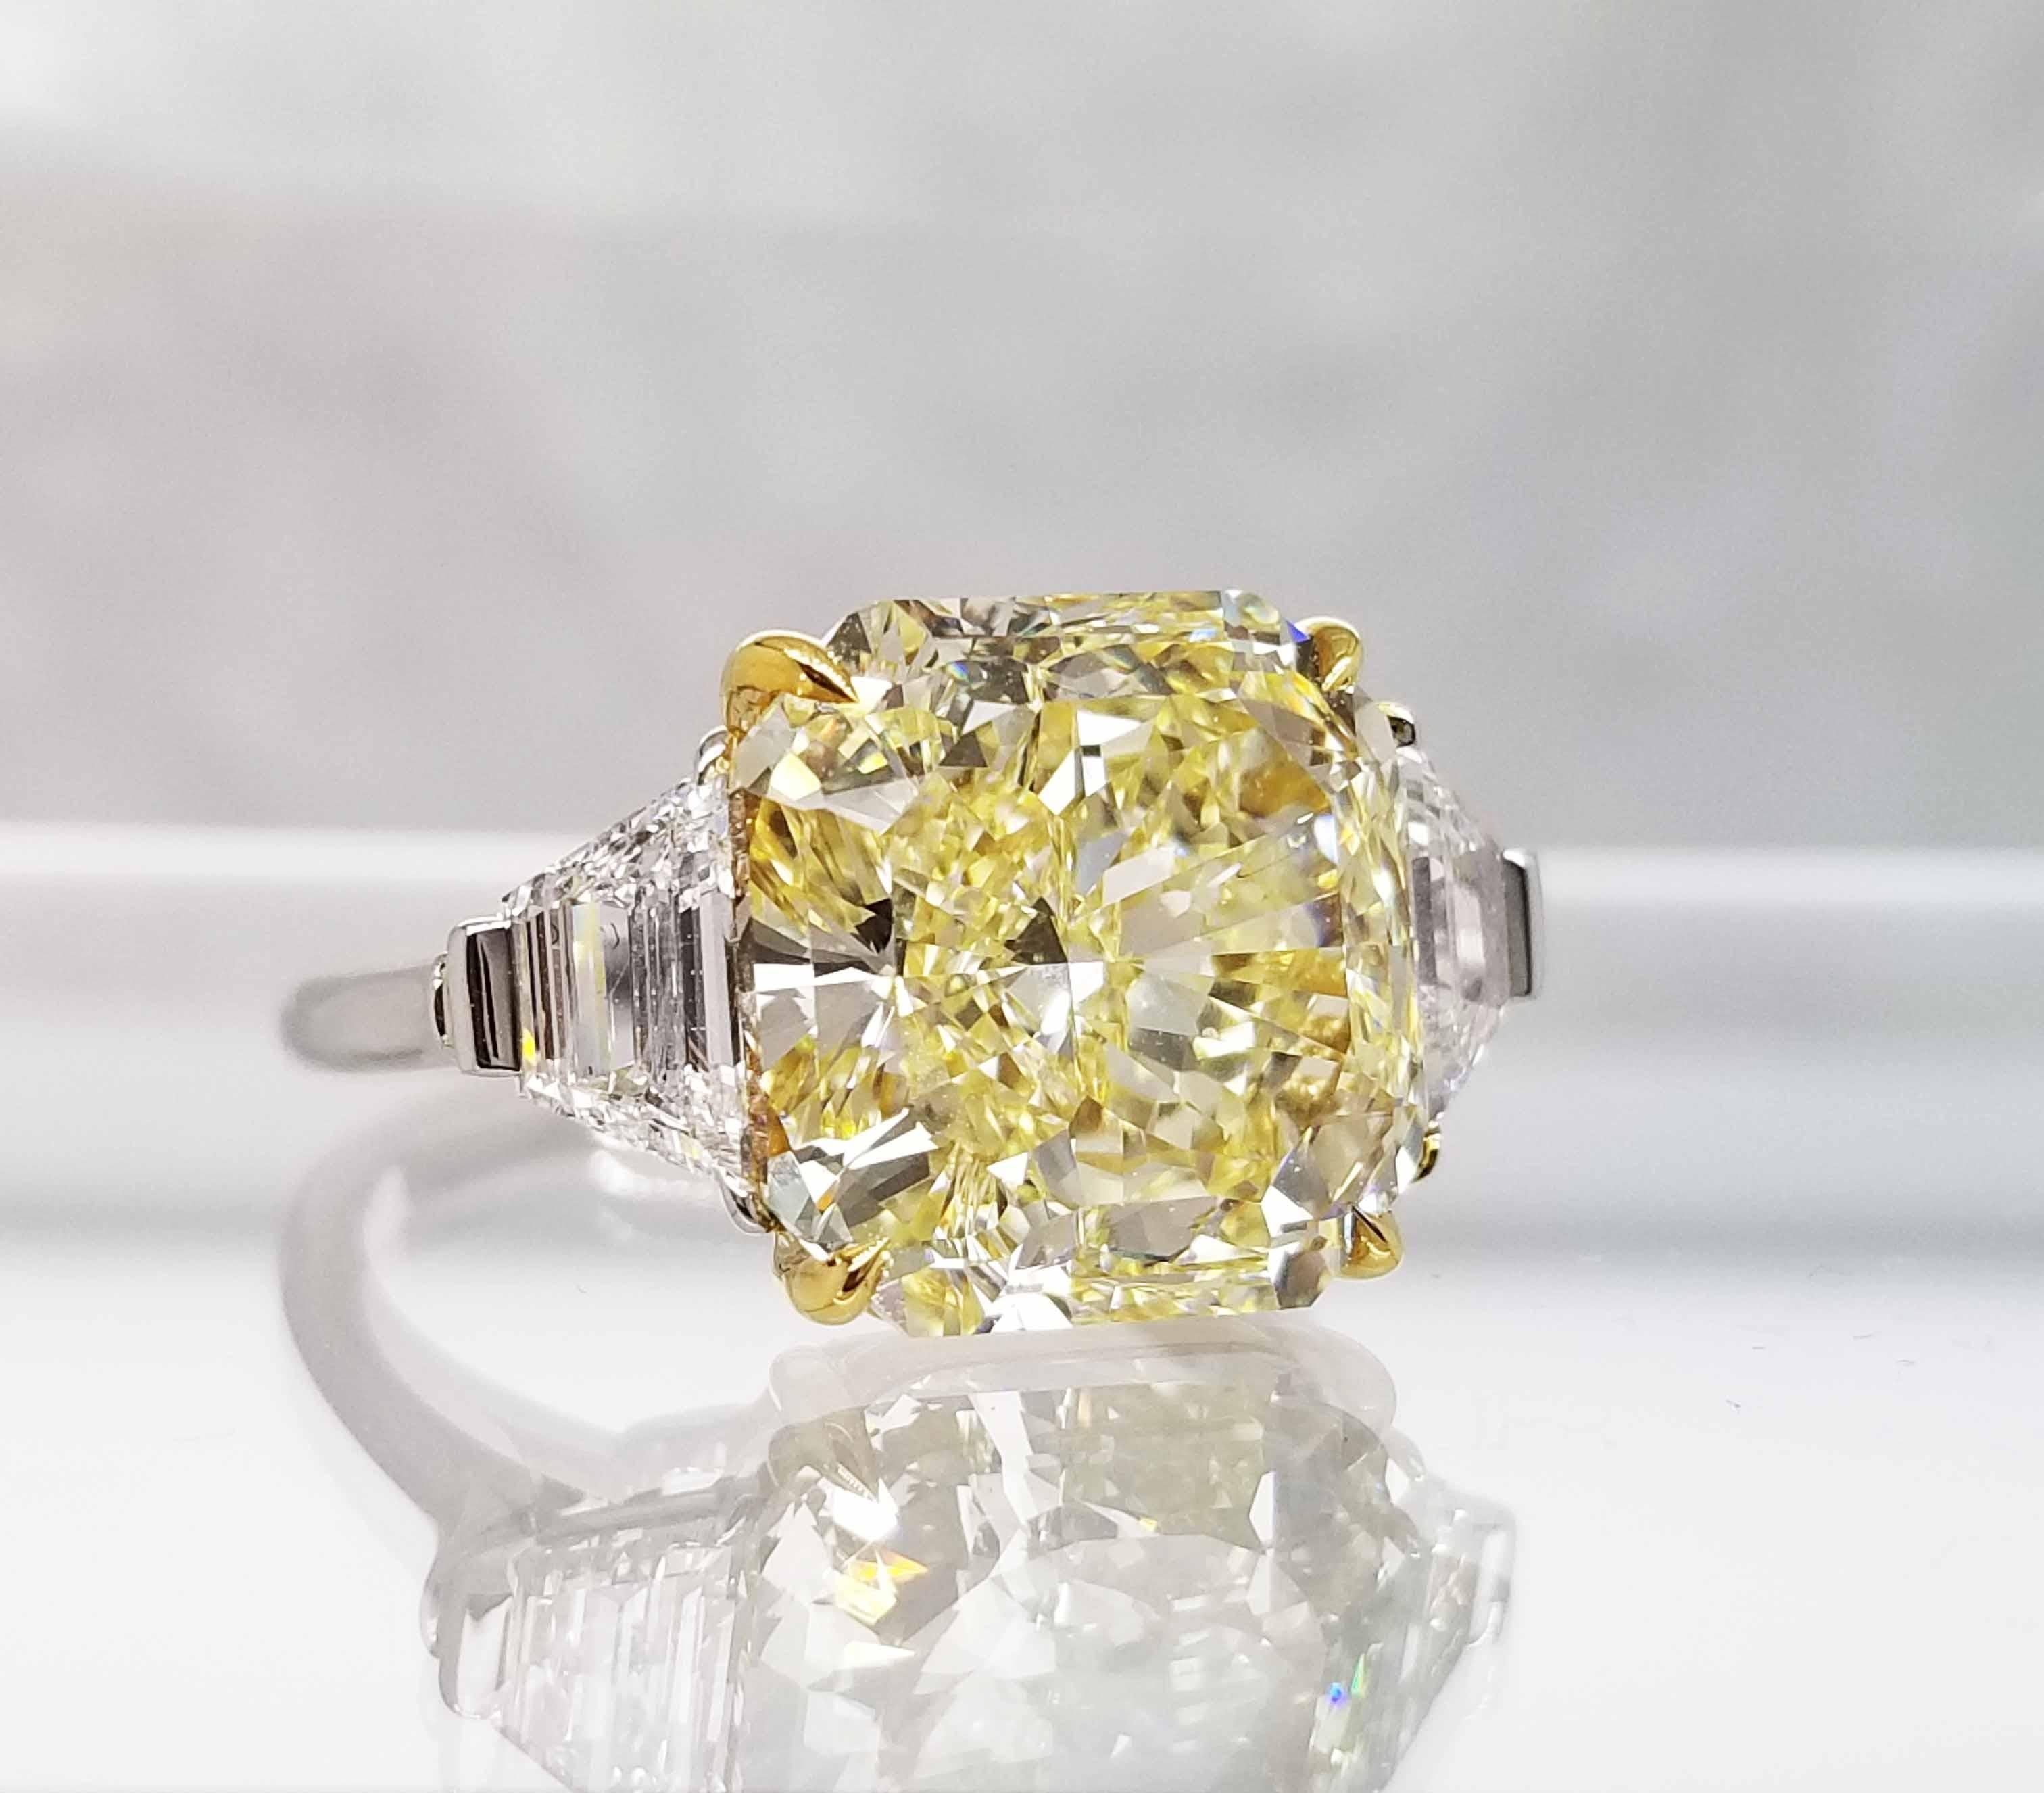 From the Collection of Scarselli this gorgeous 8.12 carat Natural Fancy Yellow Radiant cut Diamond is Internally Flawless and is classically set in  a Platinum and 18 karat yellow gold ring with .80ctw Trapezoid shape side diamonds for a clean and